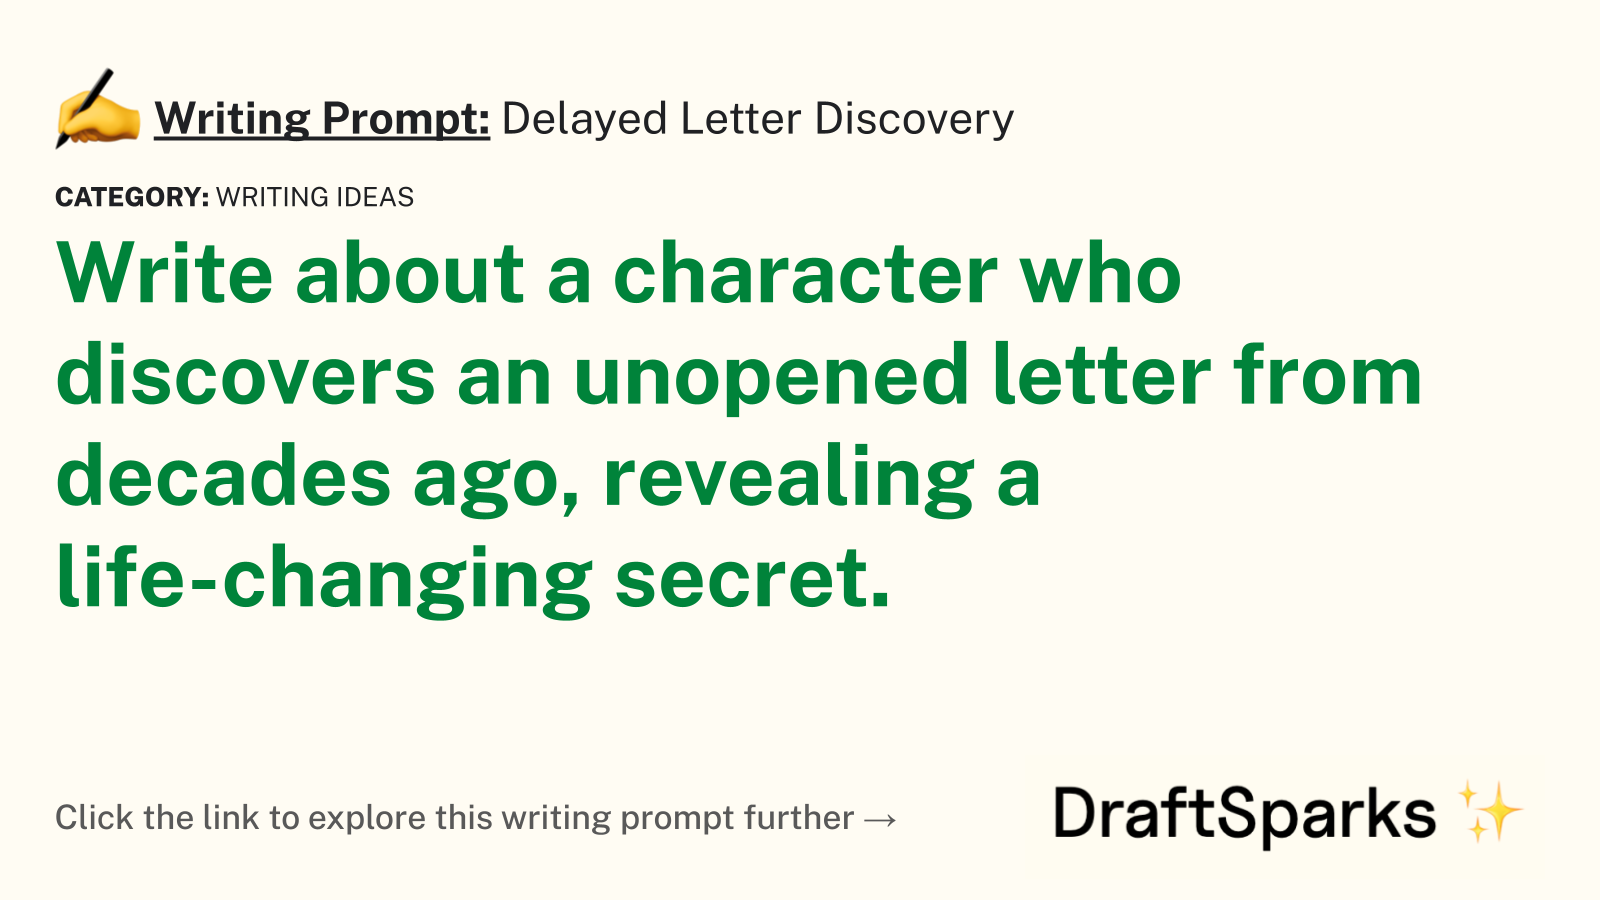 Delayed Letter Discovery